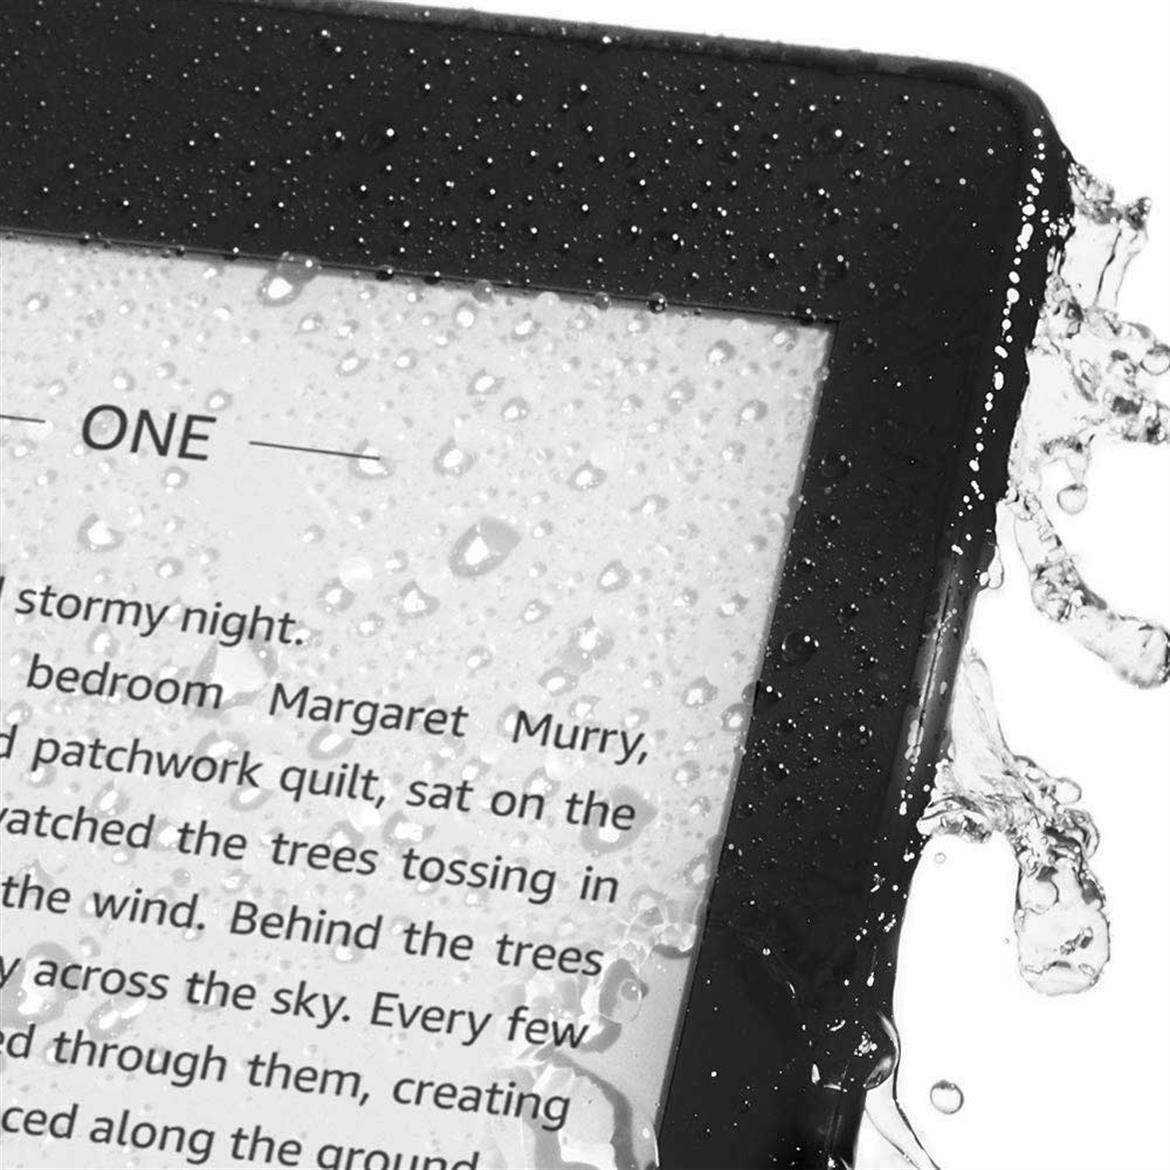 Amazon’s Latest Kindle Paperwhite E-Reader Is Thinner And Waterproof